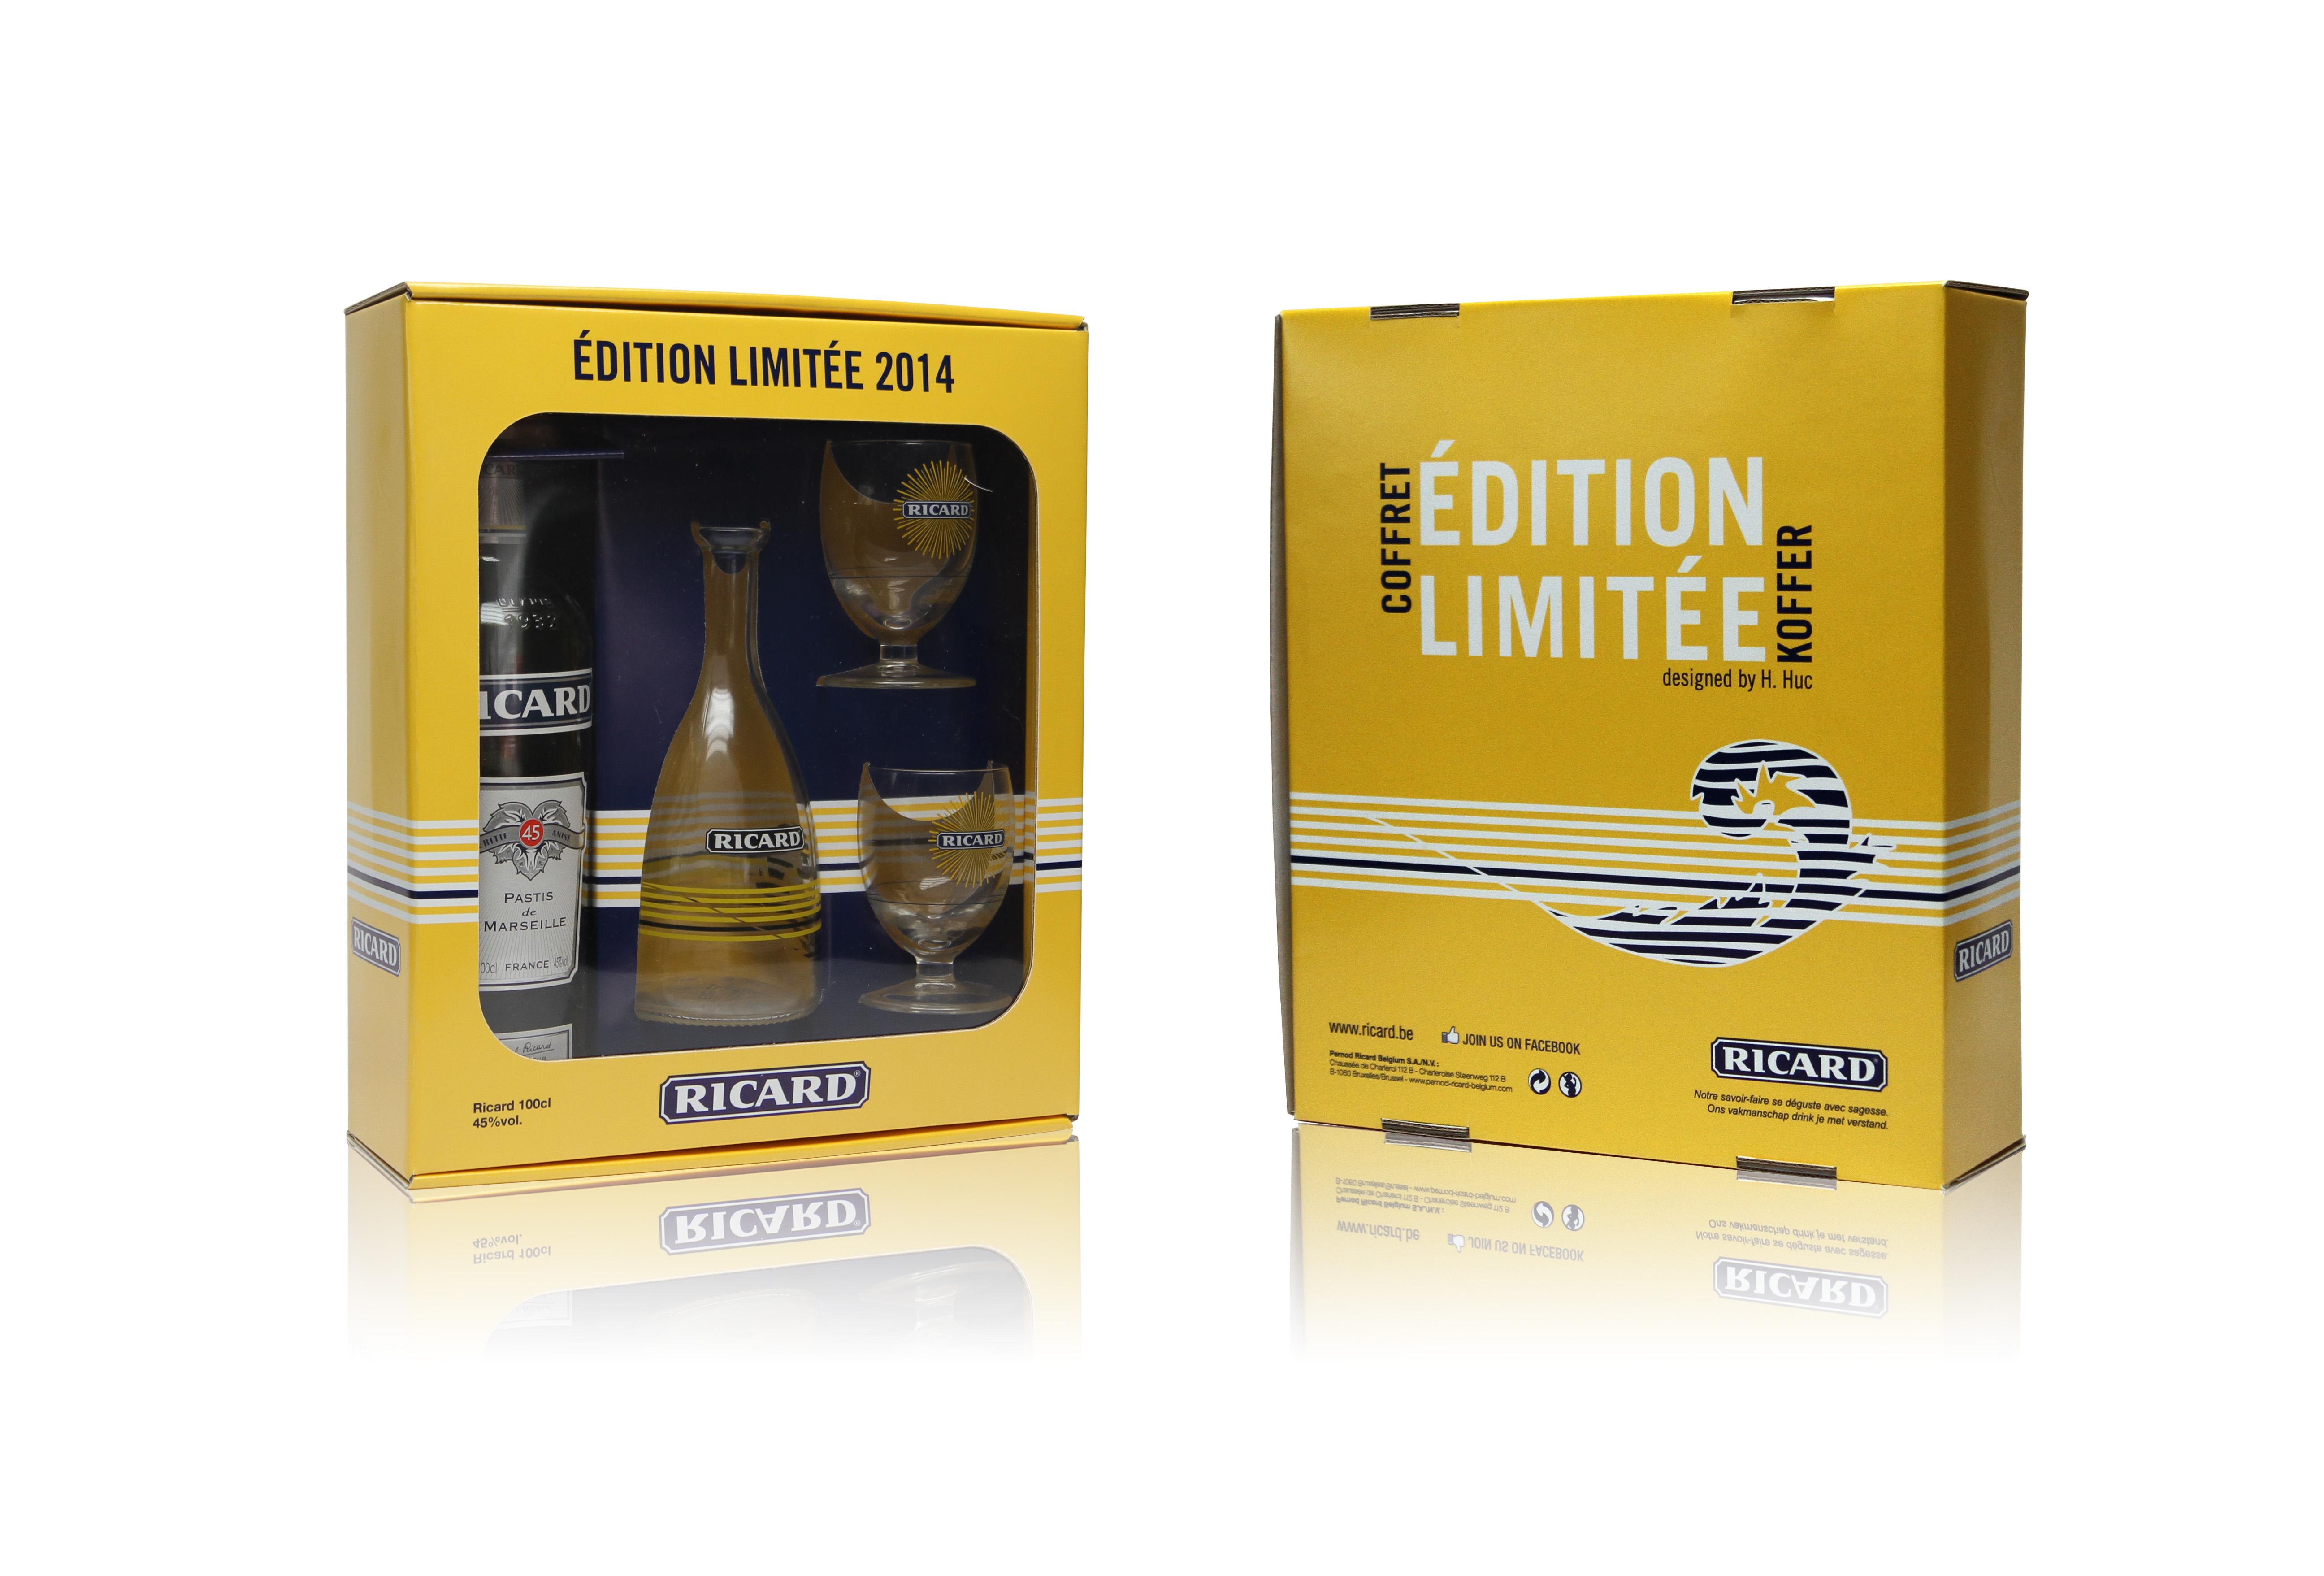 Ricard limited edition, € 24,99